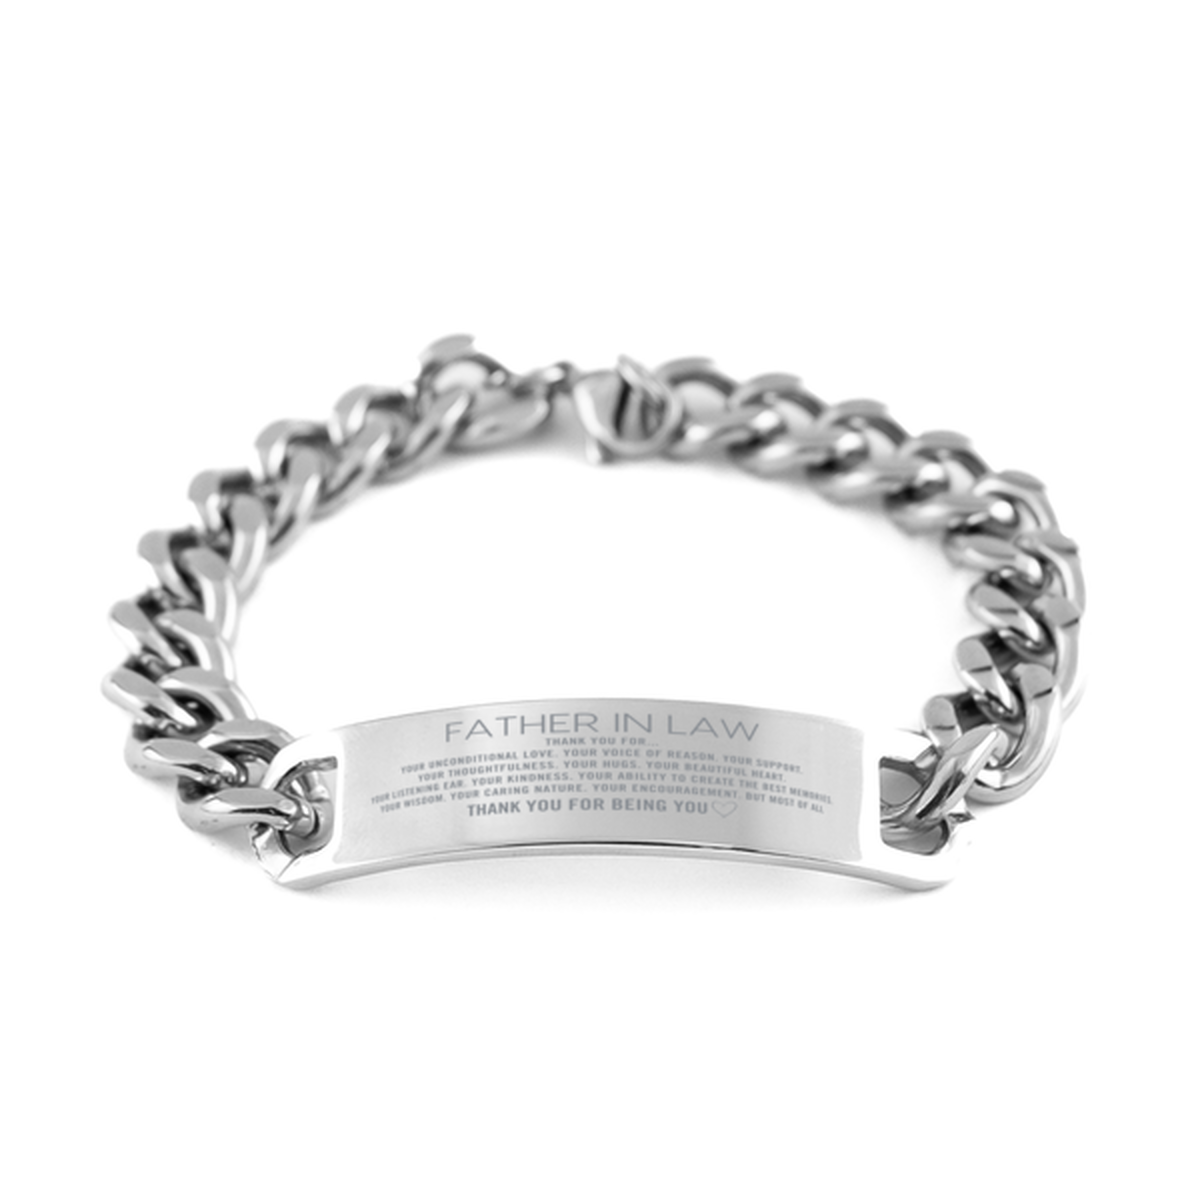 Father In Law Cuban Chain Stainless Steel Bracelet Custom, Engraved Gifts For Father In Law Christmas Graduation Birthday Gifts for Men Women Father In Law Thank you for Your unconditional love